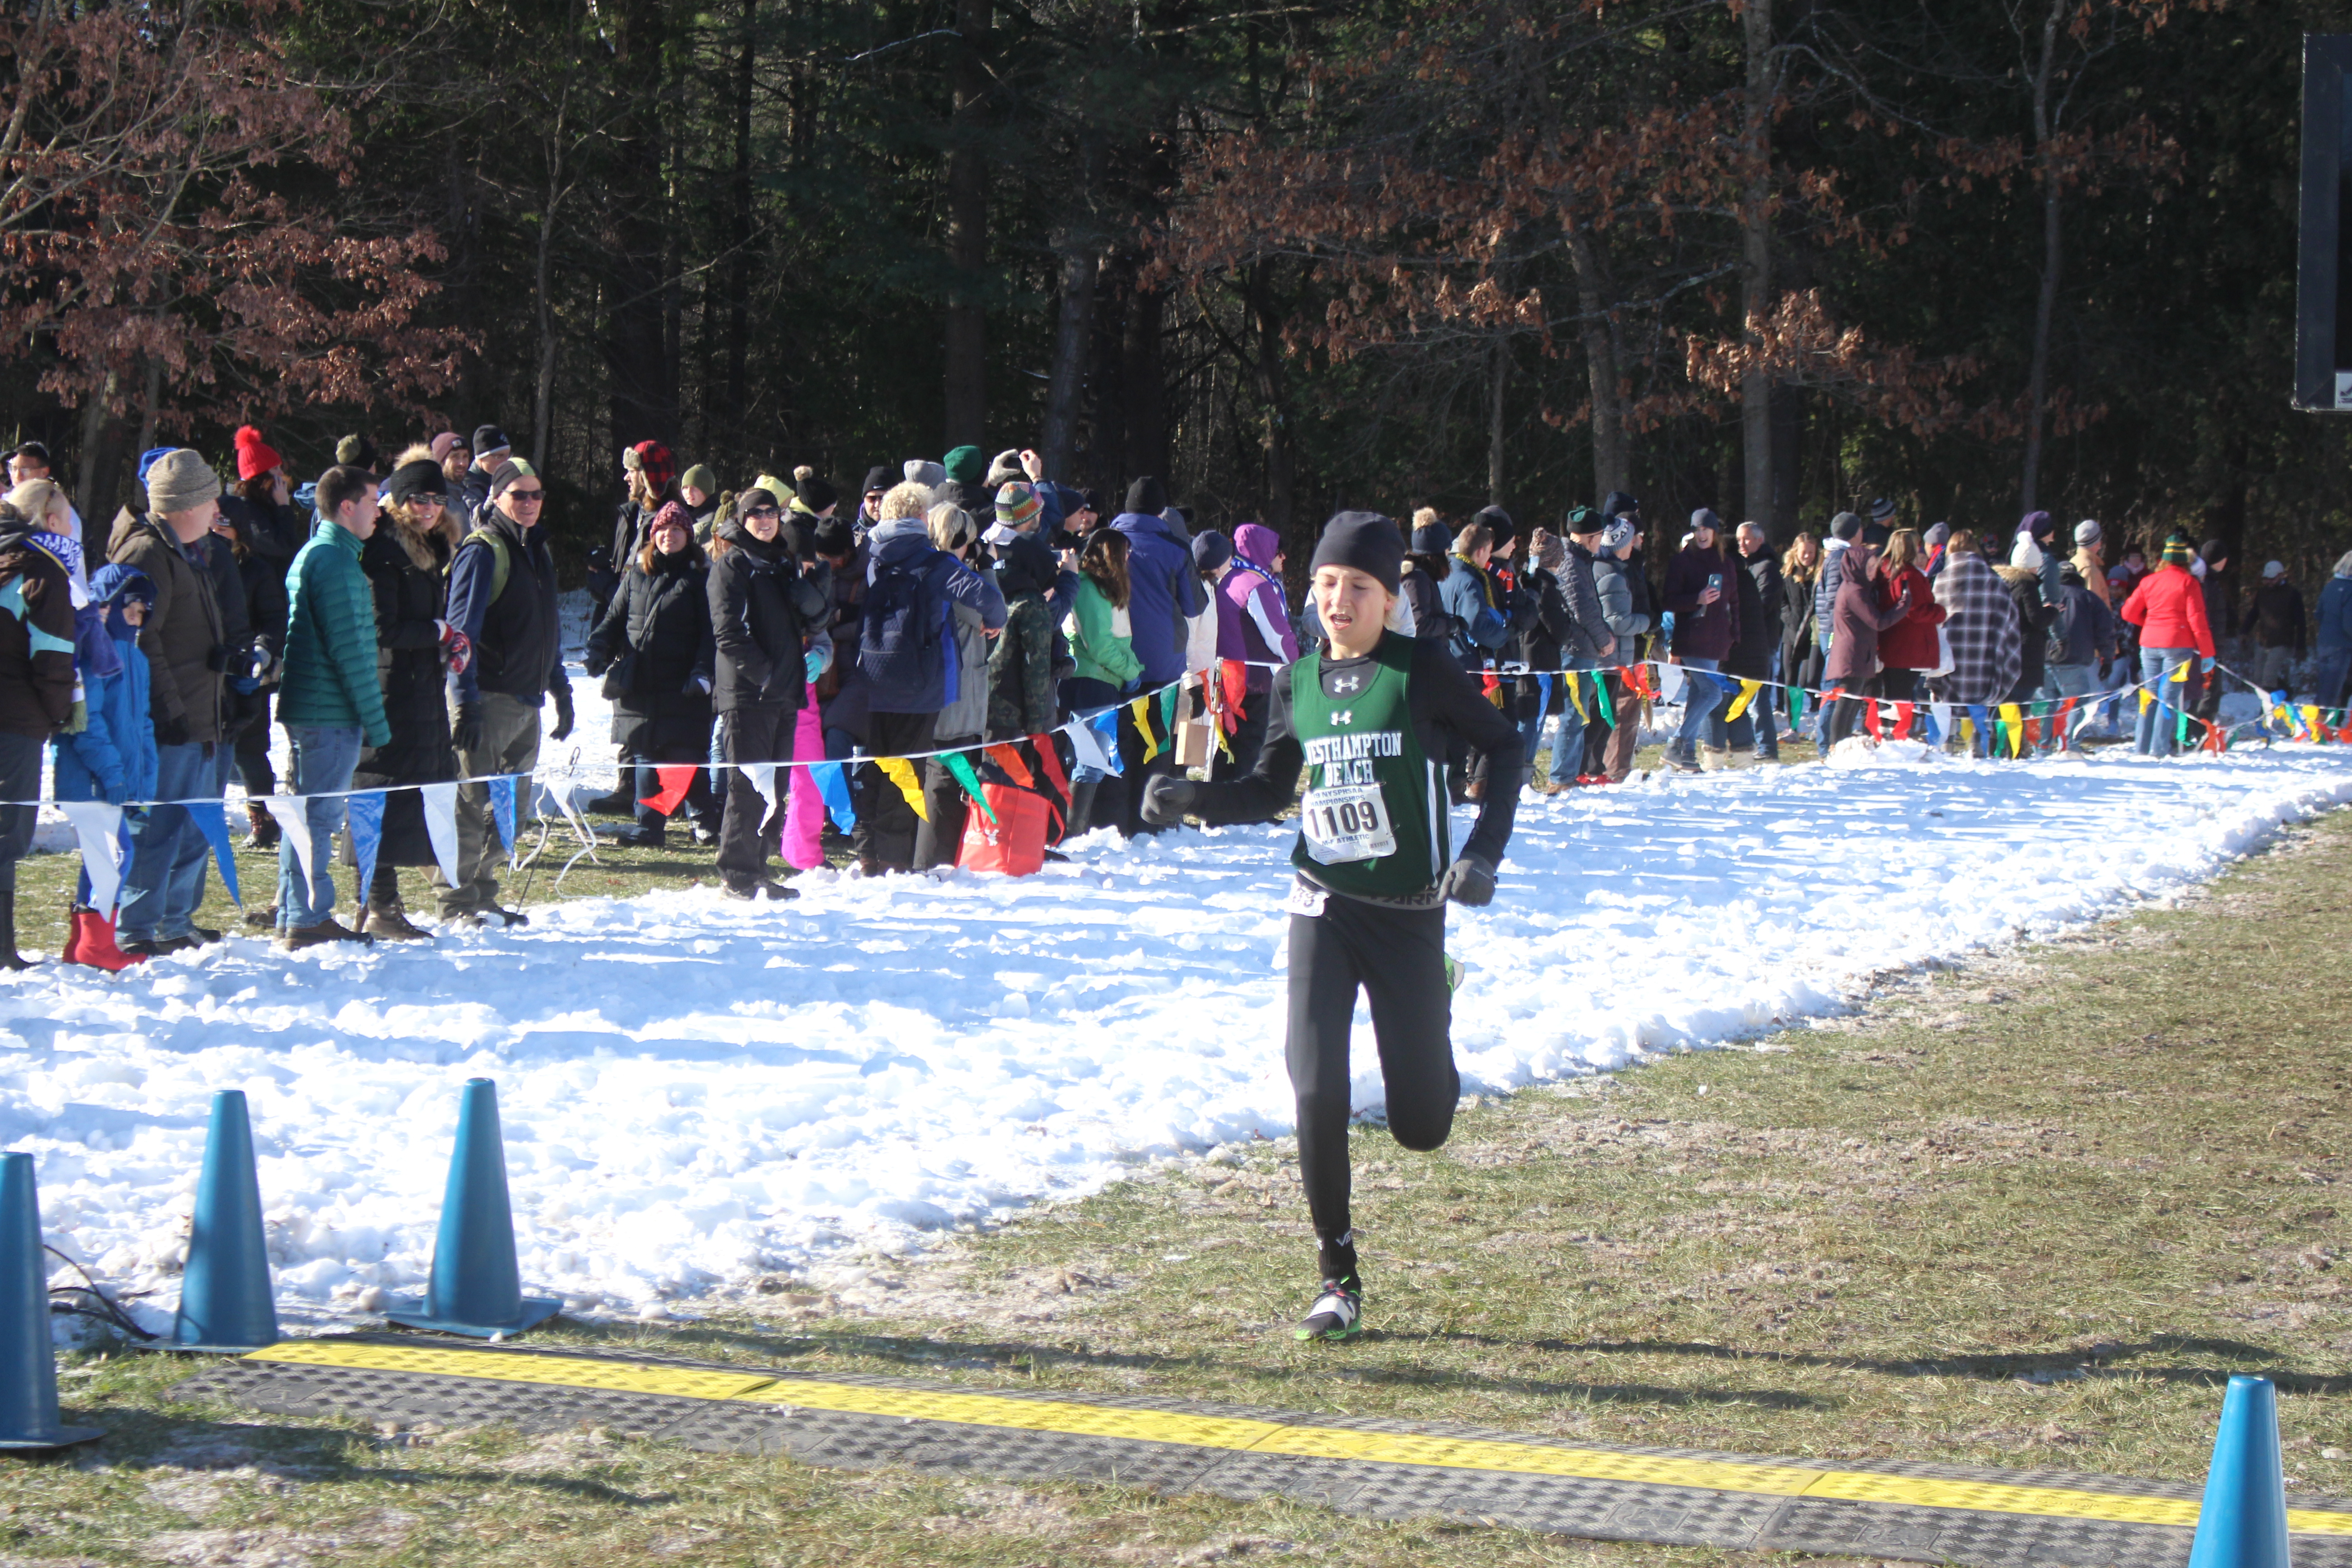 Westhampton Beach sophomore Cole Cammarate made the trip with the team last weekend and finished in an admirable 17:23.6.